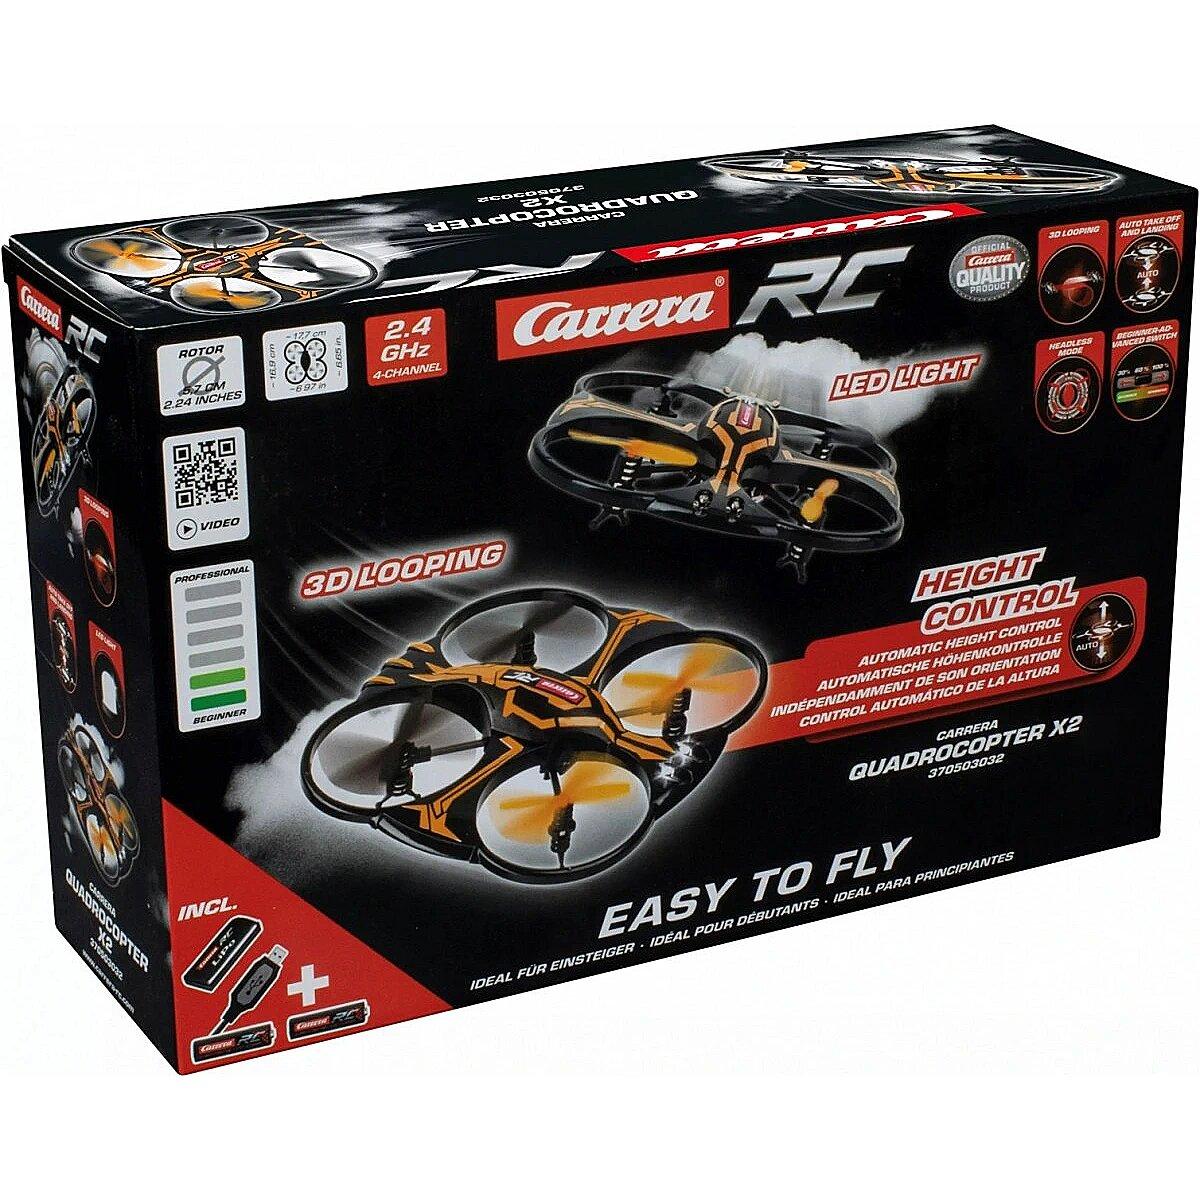 Carrera Rc Drone: Conquer the Skies with the Carrera RC Drone